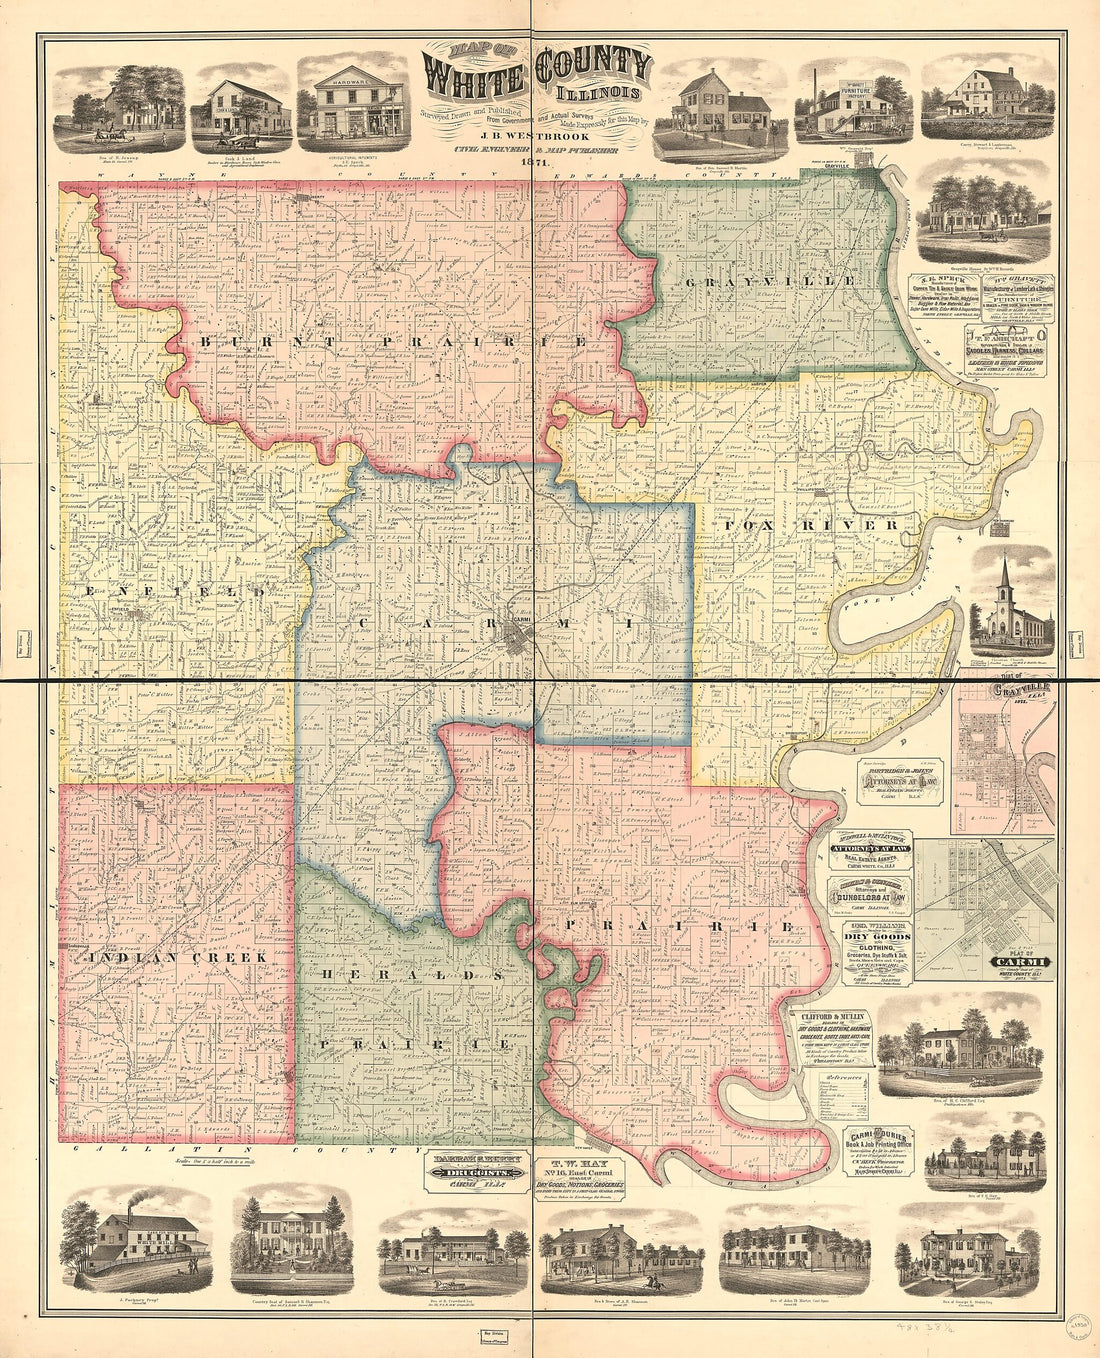 This old map of Map of White County, Illinois from 1871 was created by J. B. Westbrook in 1871